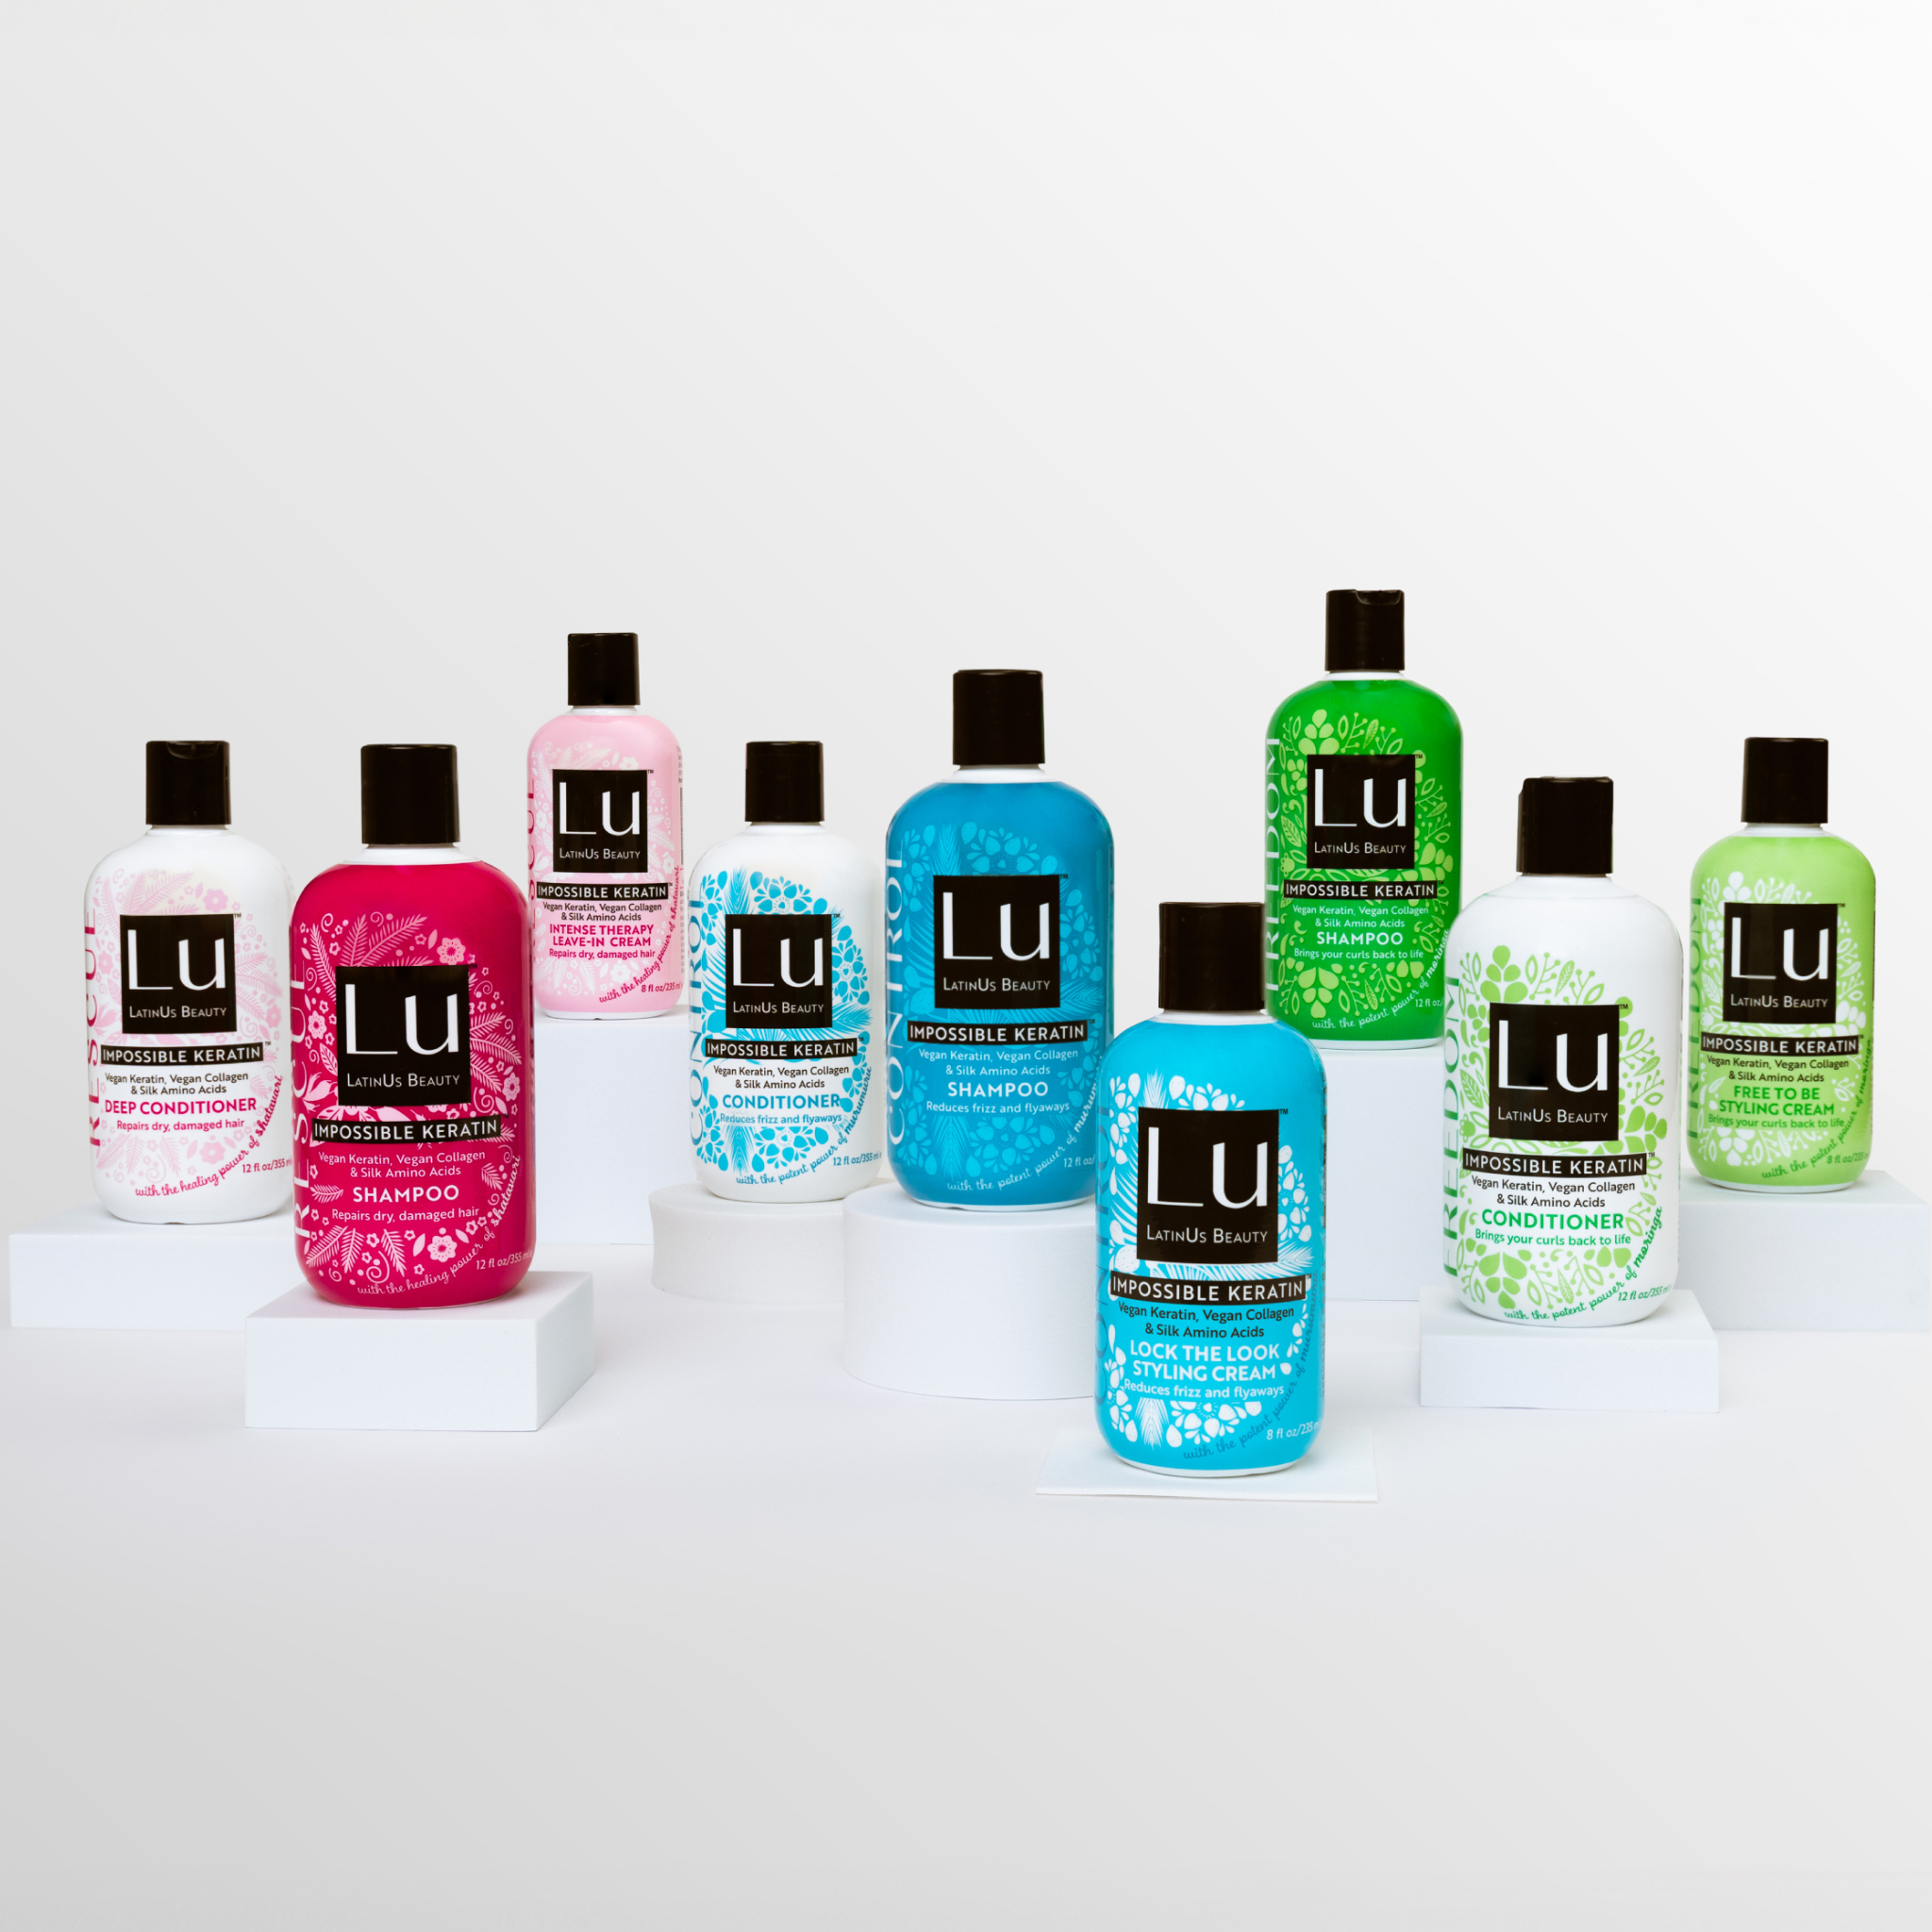 The Lu Beauty™ Collection, with Impossible Keratin™ - Our Best Value!